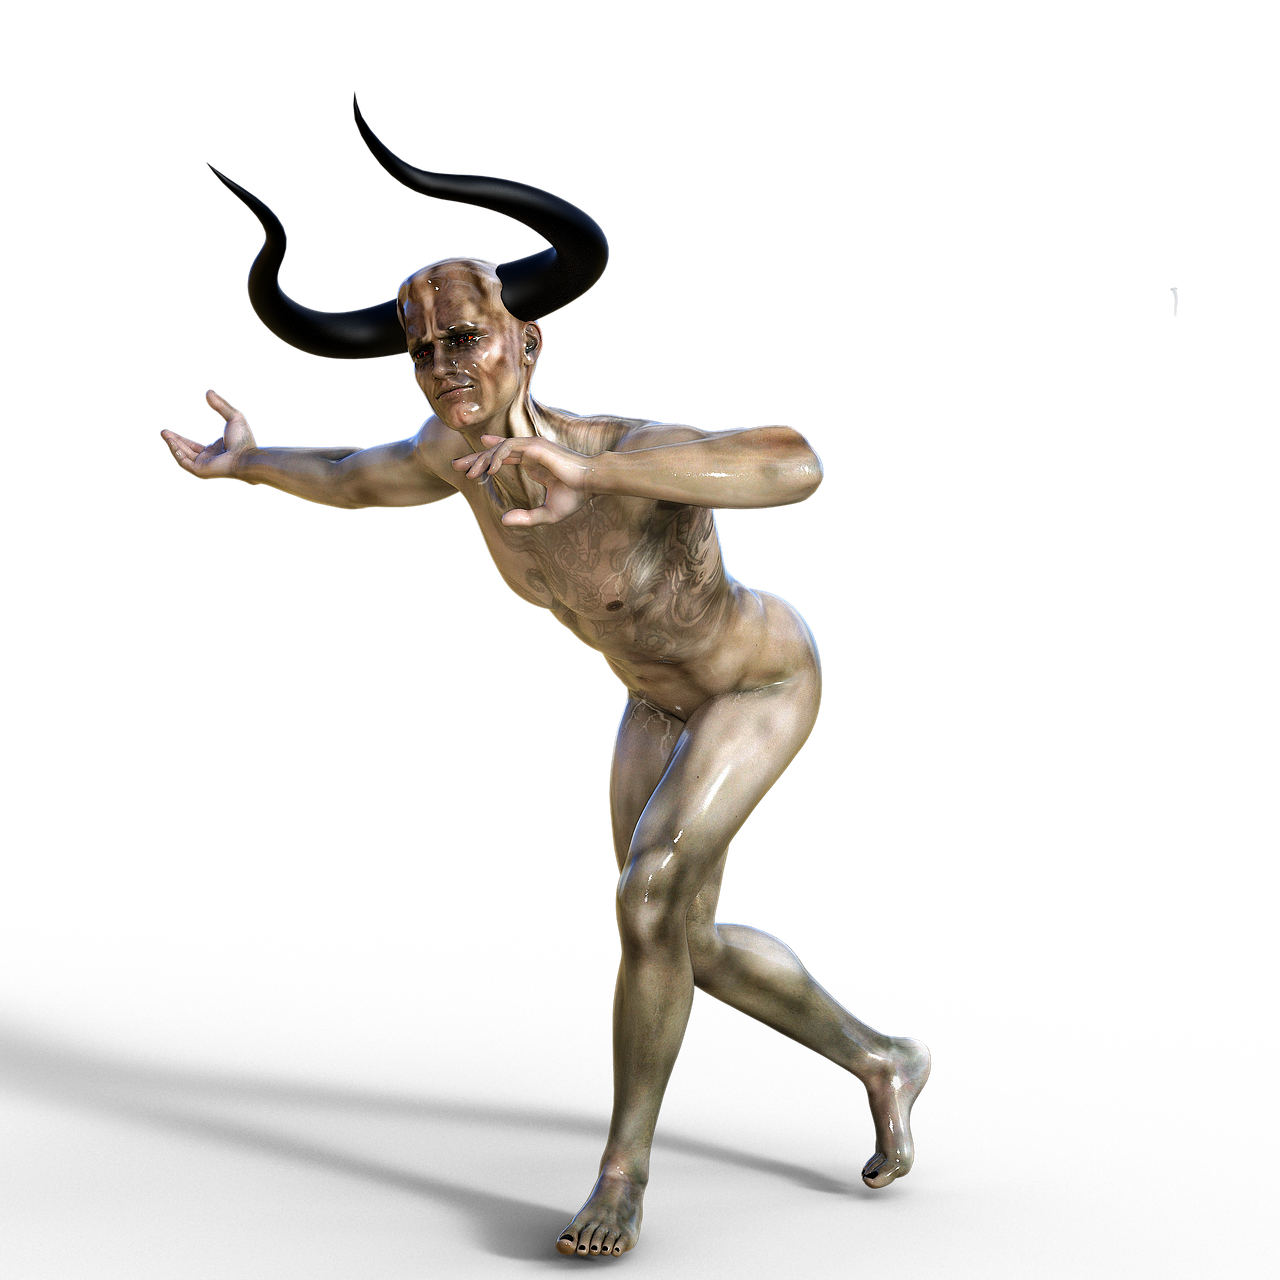 a statue of a man throwing a frisbee, inspired by Odd Nerdrum, featured on zbrush central, digital art, frank dillane as a satyr, lois greenfield, gold bodypaint, metamorphosis complex 3d render